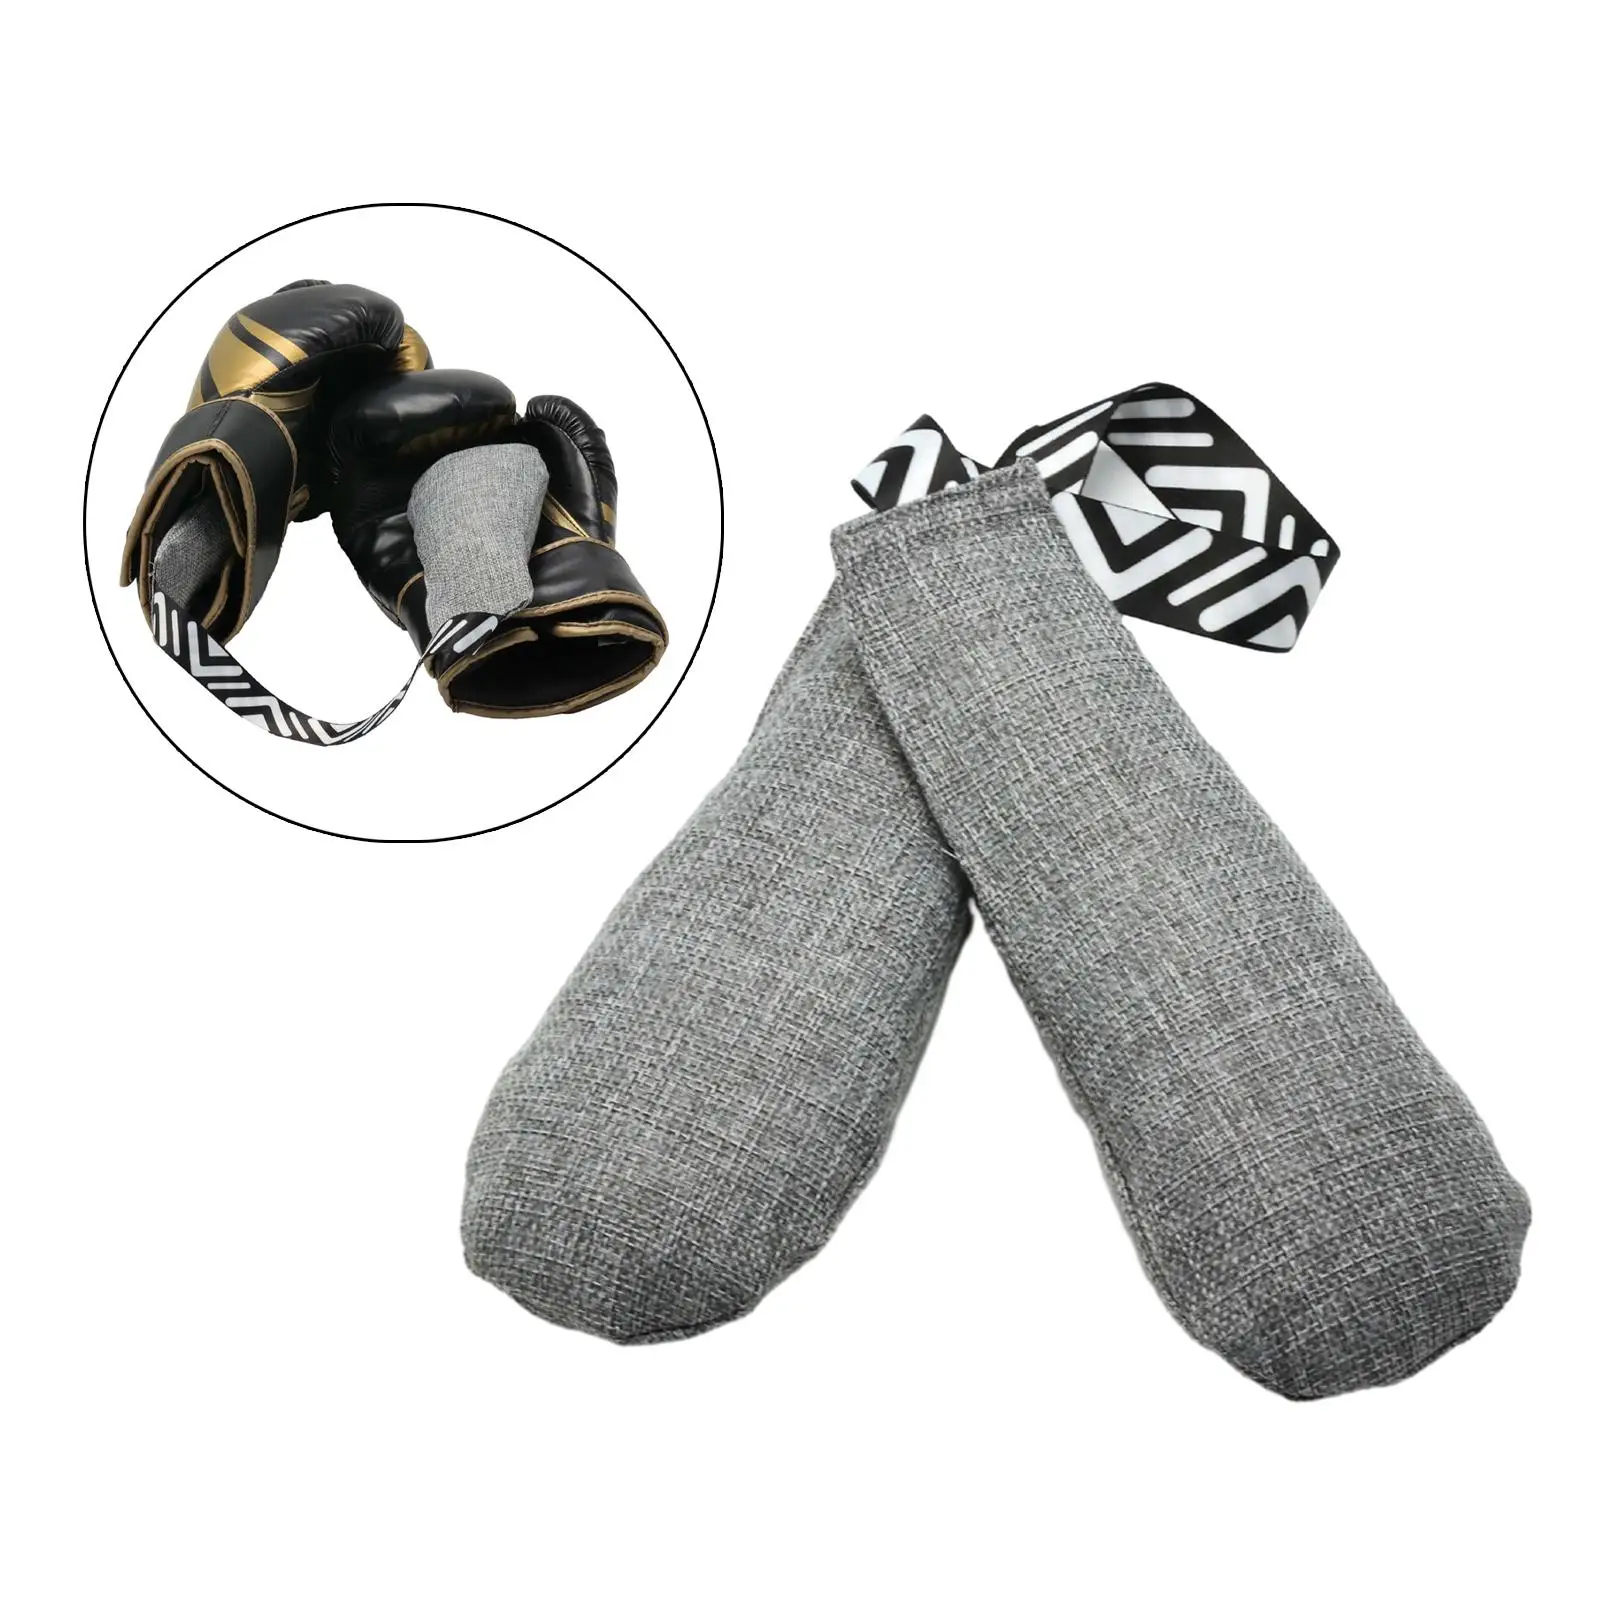 Boxing Gloves Deodorizers Portable Practical Leaves Gloves Fresh Device for All Sports Gloves Baseball Bowling Football Hockey